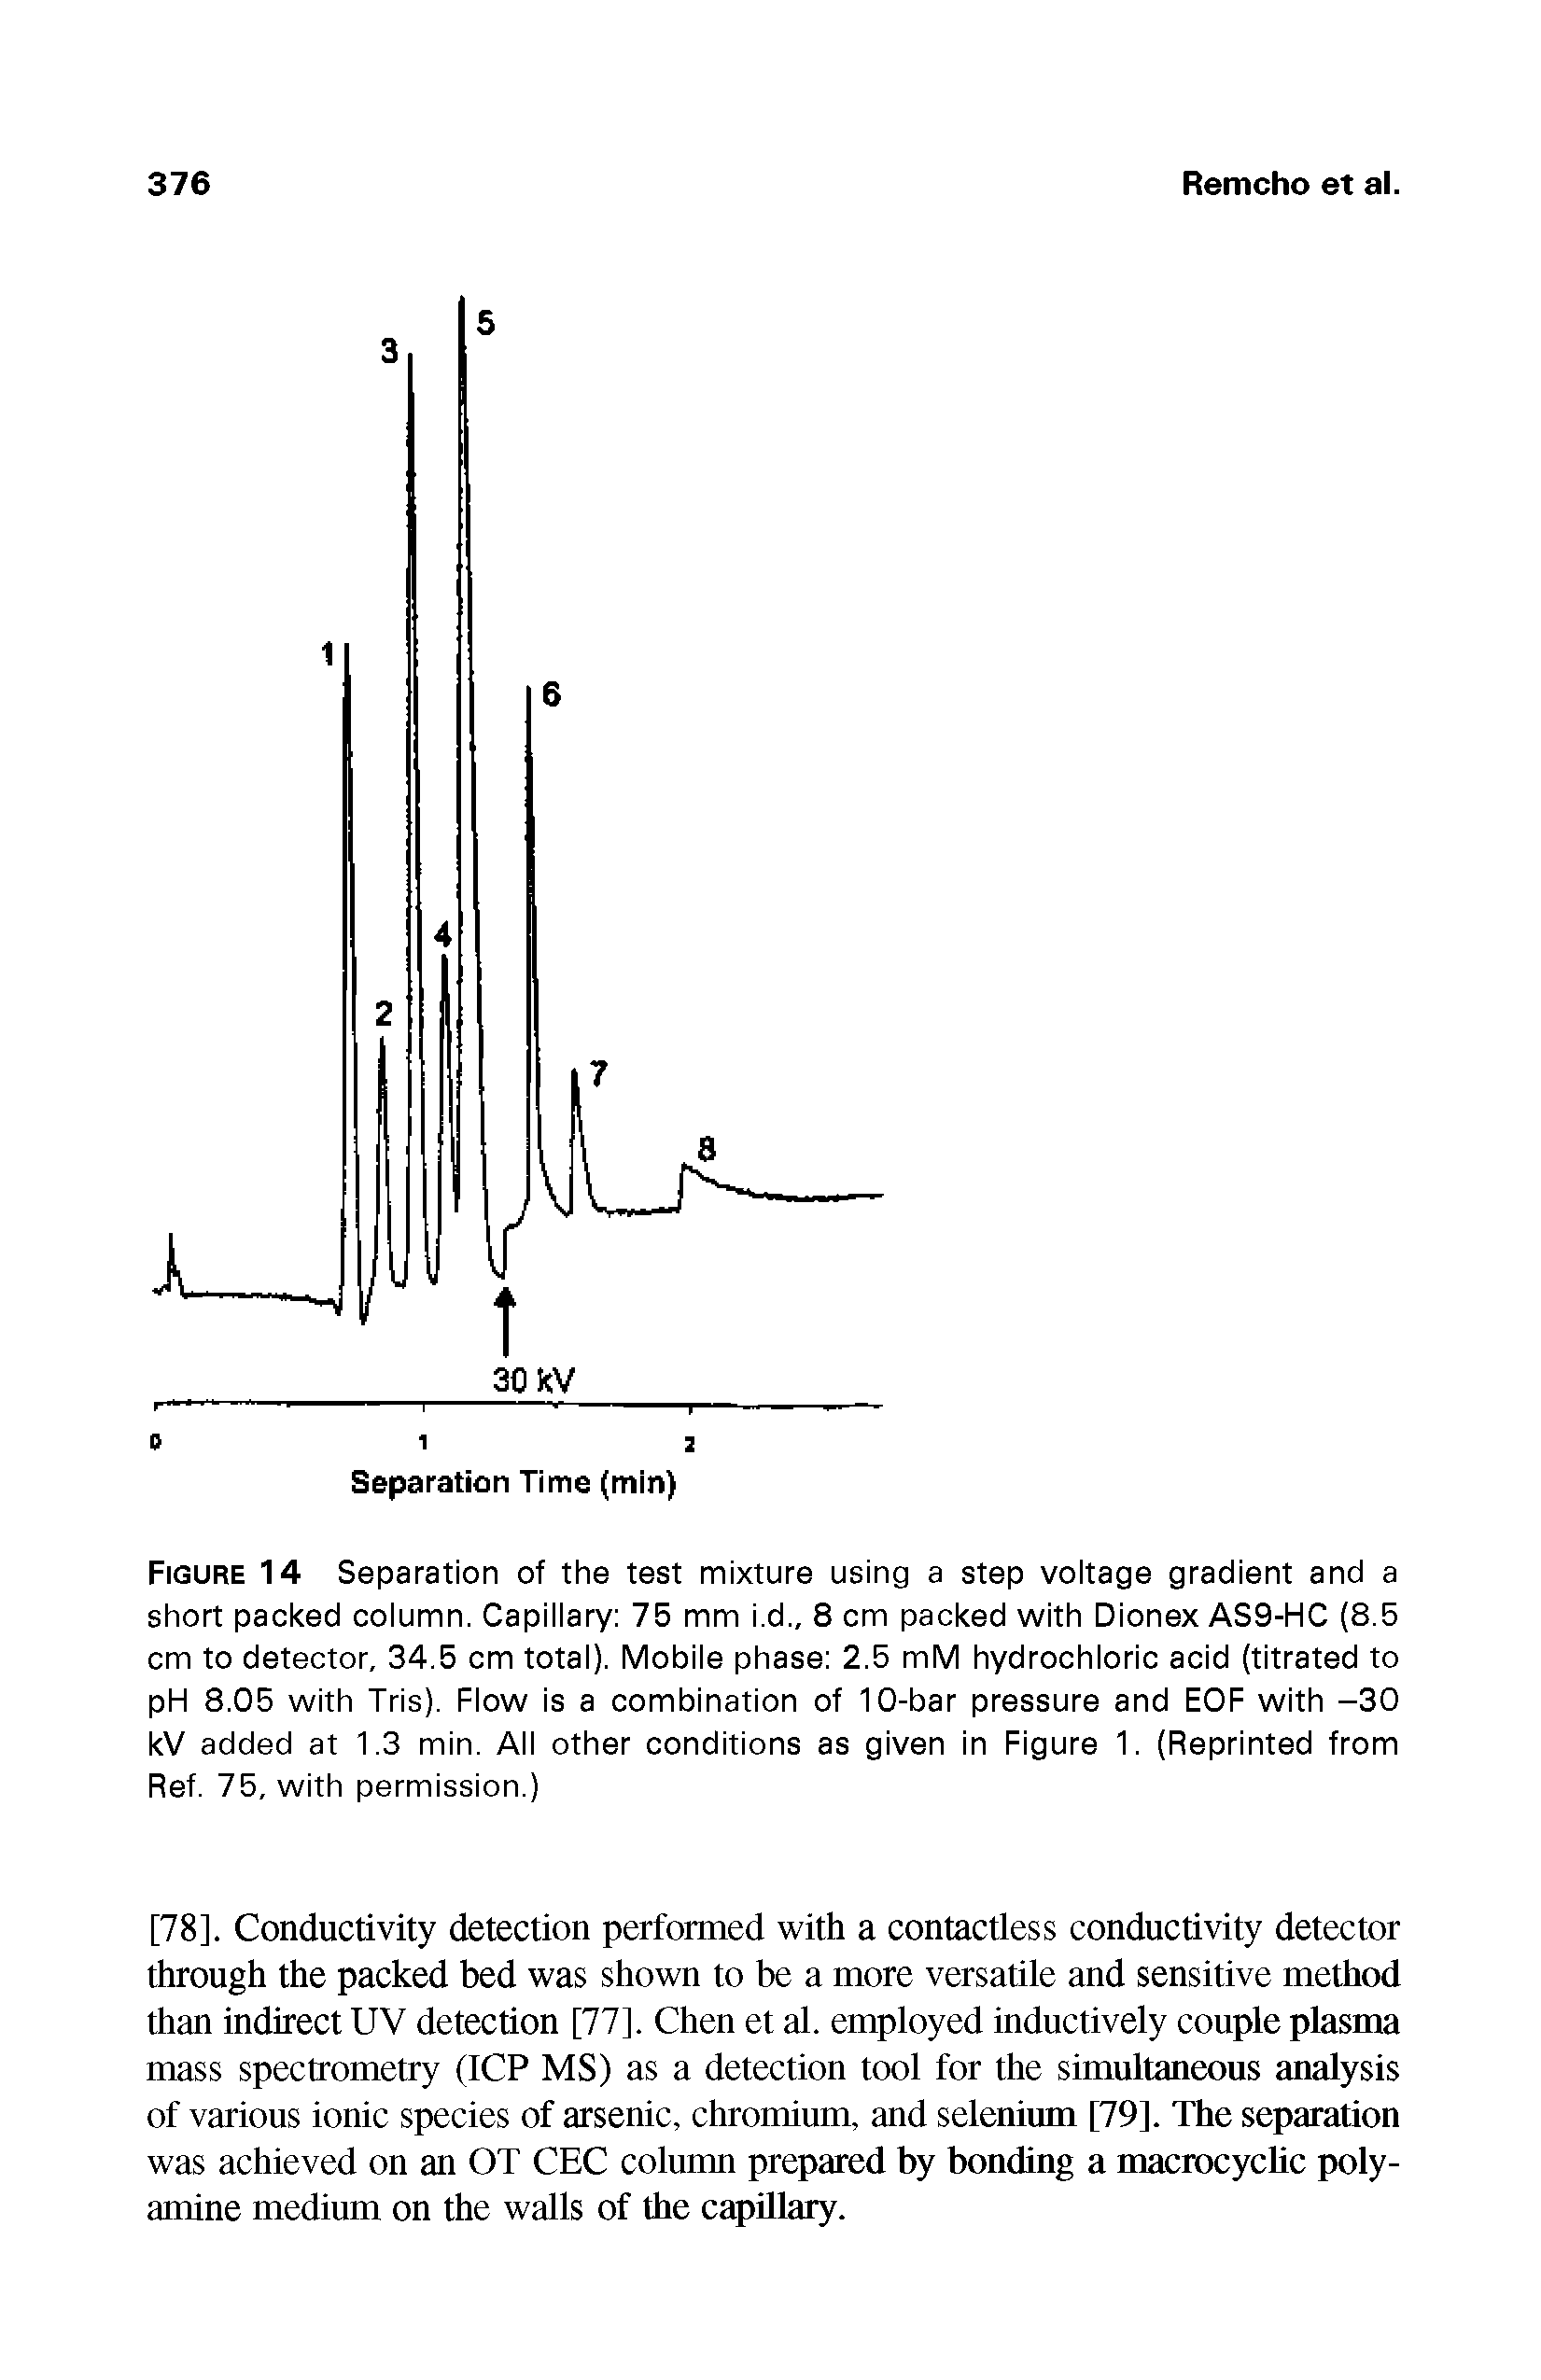 Figure 14 Separation of the test mixture using a step voltage gradient and a short packed column. Capillary 75 mm i.d., 8 cm packed with Dionex AS9-HC (8.5 cm to detector, 34.5 cm total). Mobile phase 2.5 mM hydrochloric acid (titrated to pH 8.05 with Tris). Flow is a combination of 10-bar pressure and EOF with -30 kV added at 1.3 min. All other conditions as given in Figure 1. (Reprinted from Ref. 75, with permission.)...